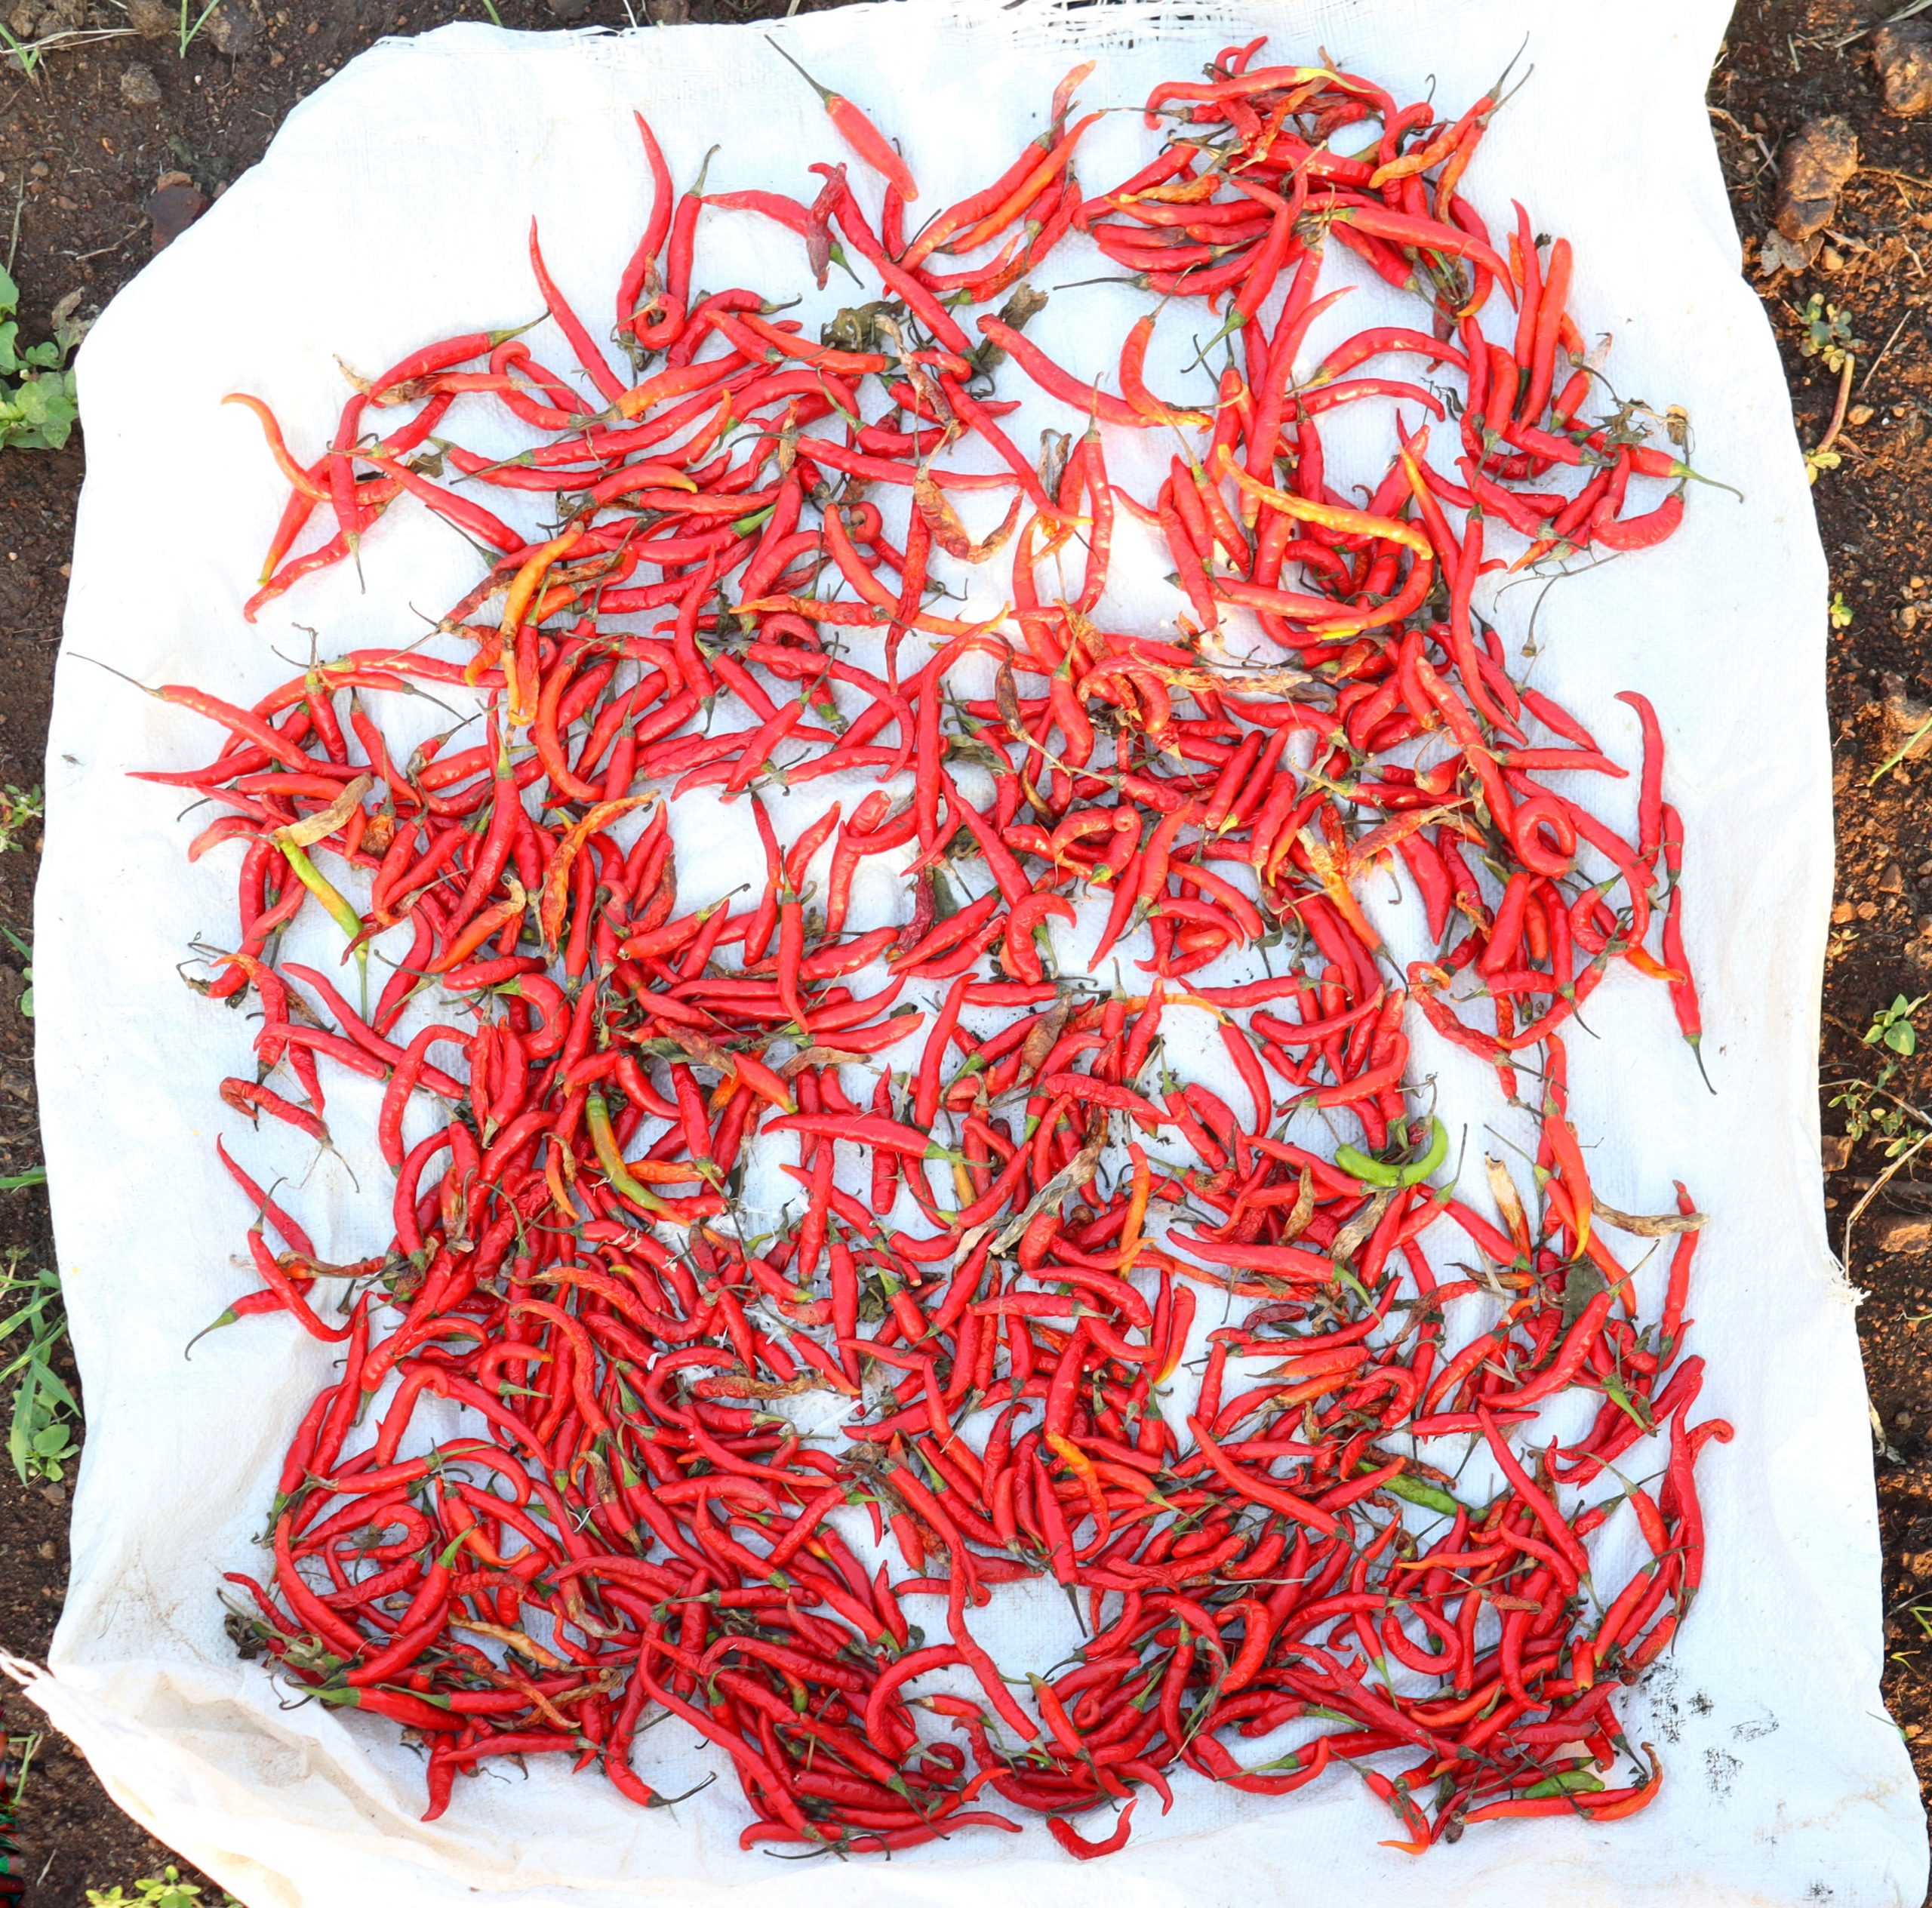 Red chilies on ground